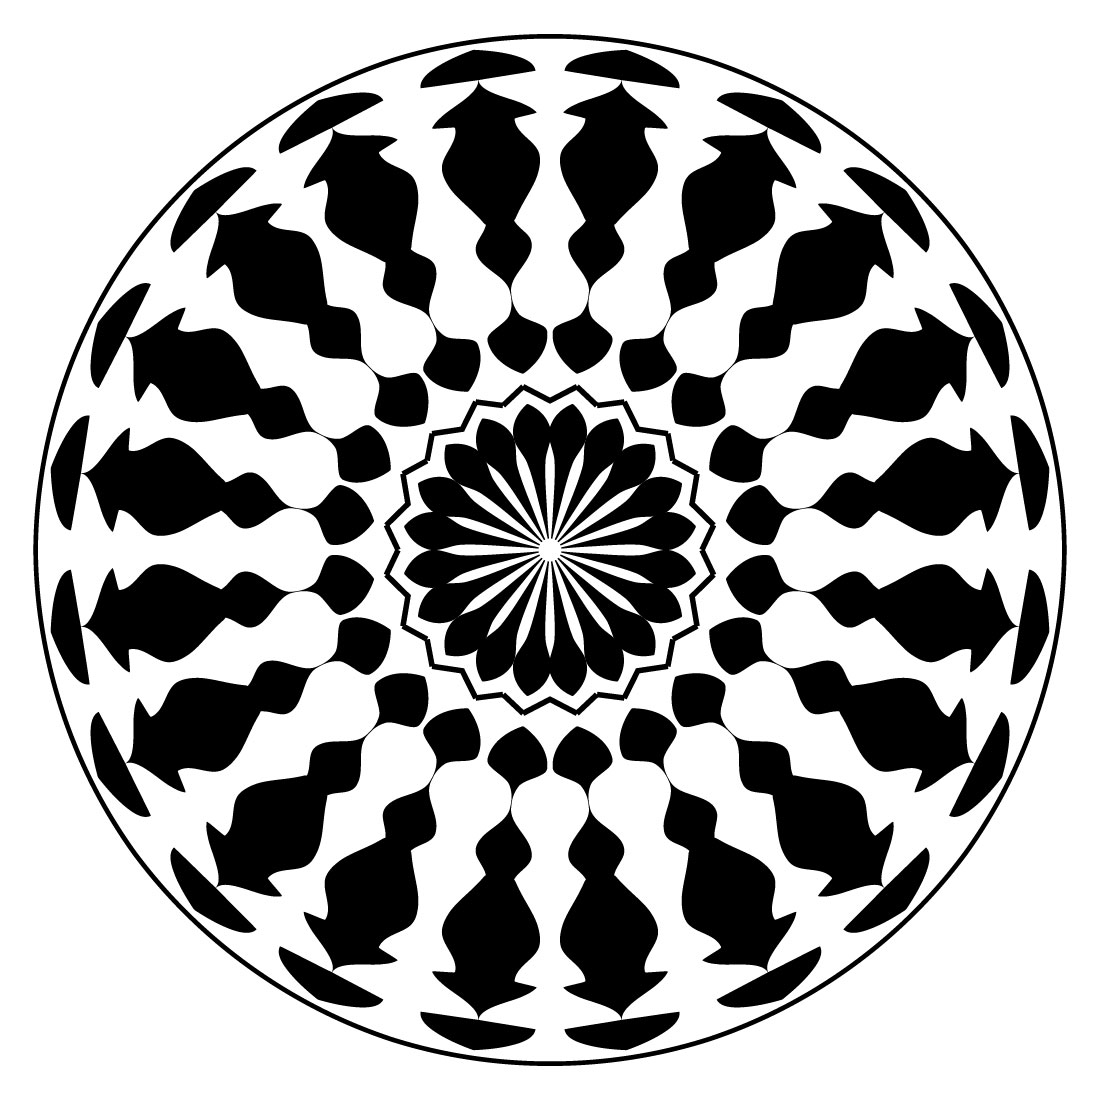 Mandala-art-with-rounded-bars-and-pilers cover image.